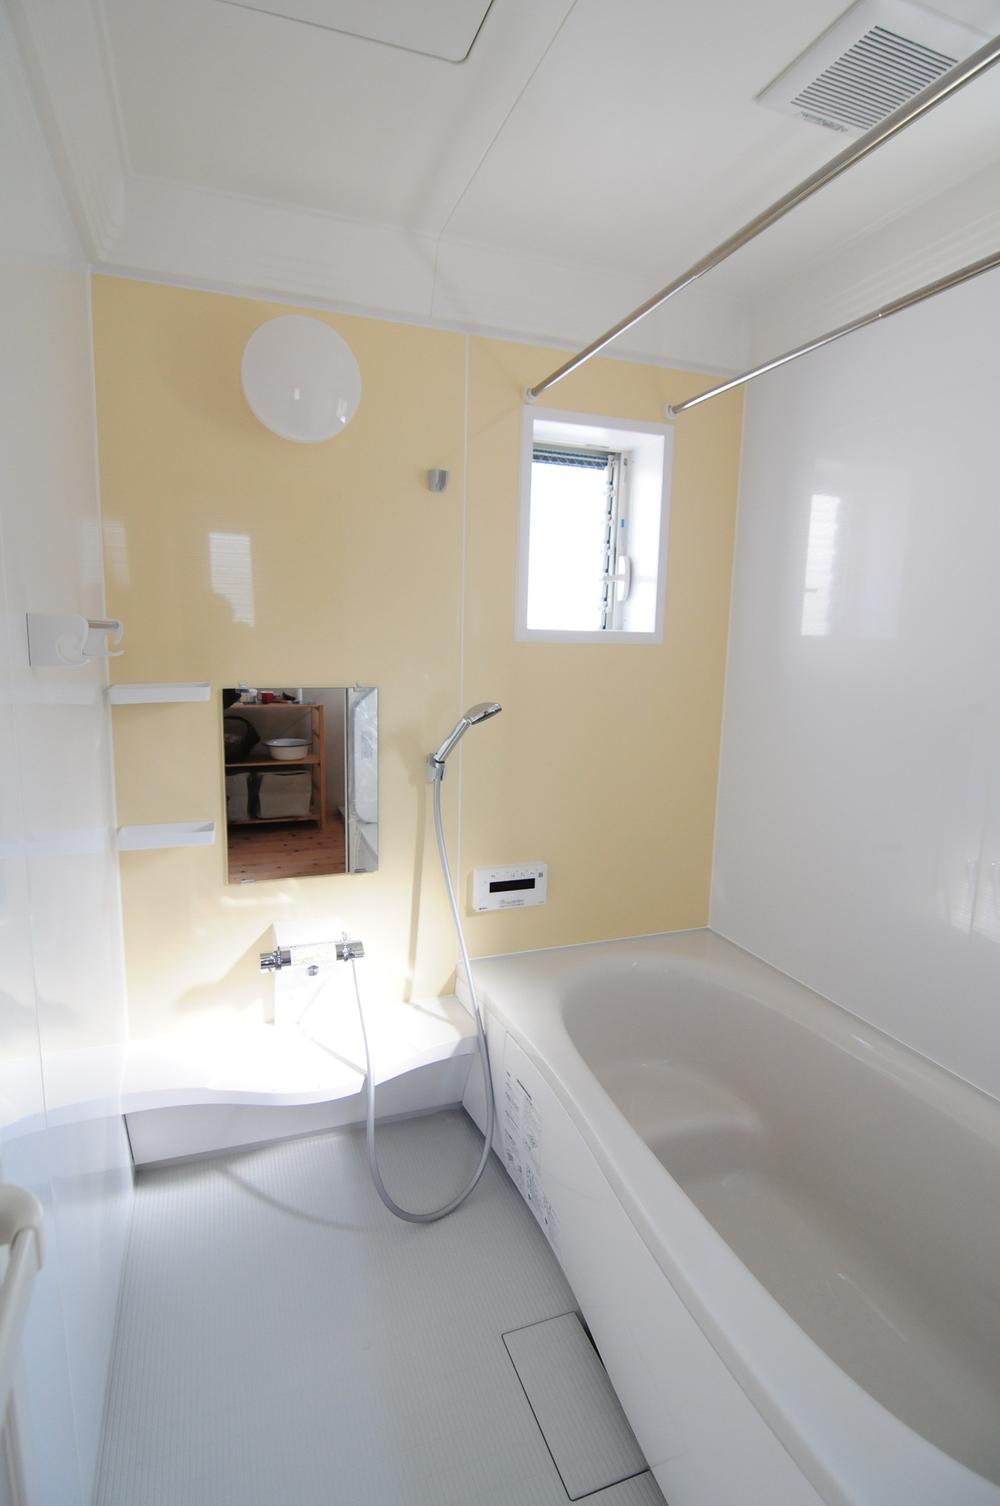 Bathroom. Full of clean bathroom. (January 2012 new construction during the shooting)